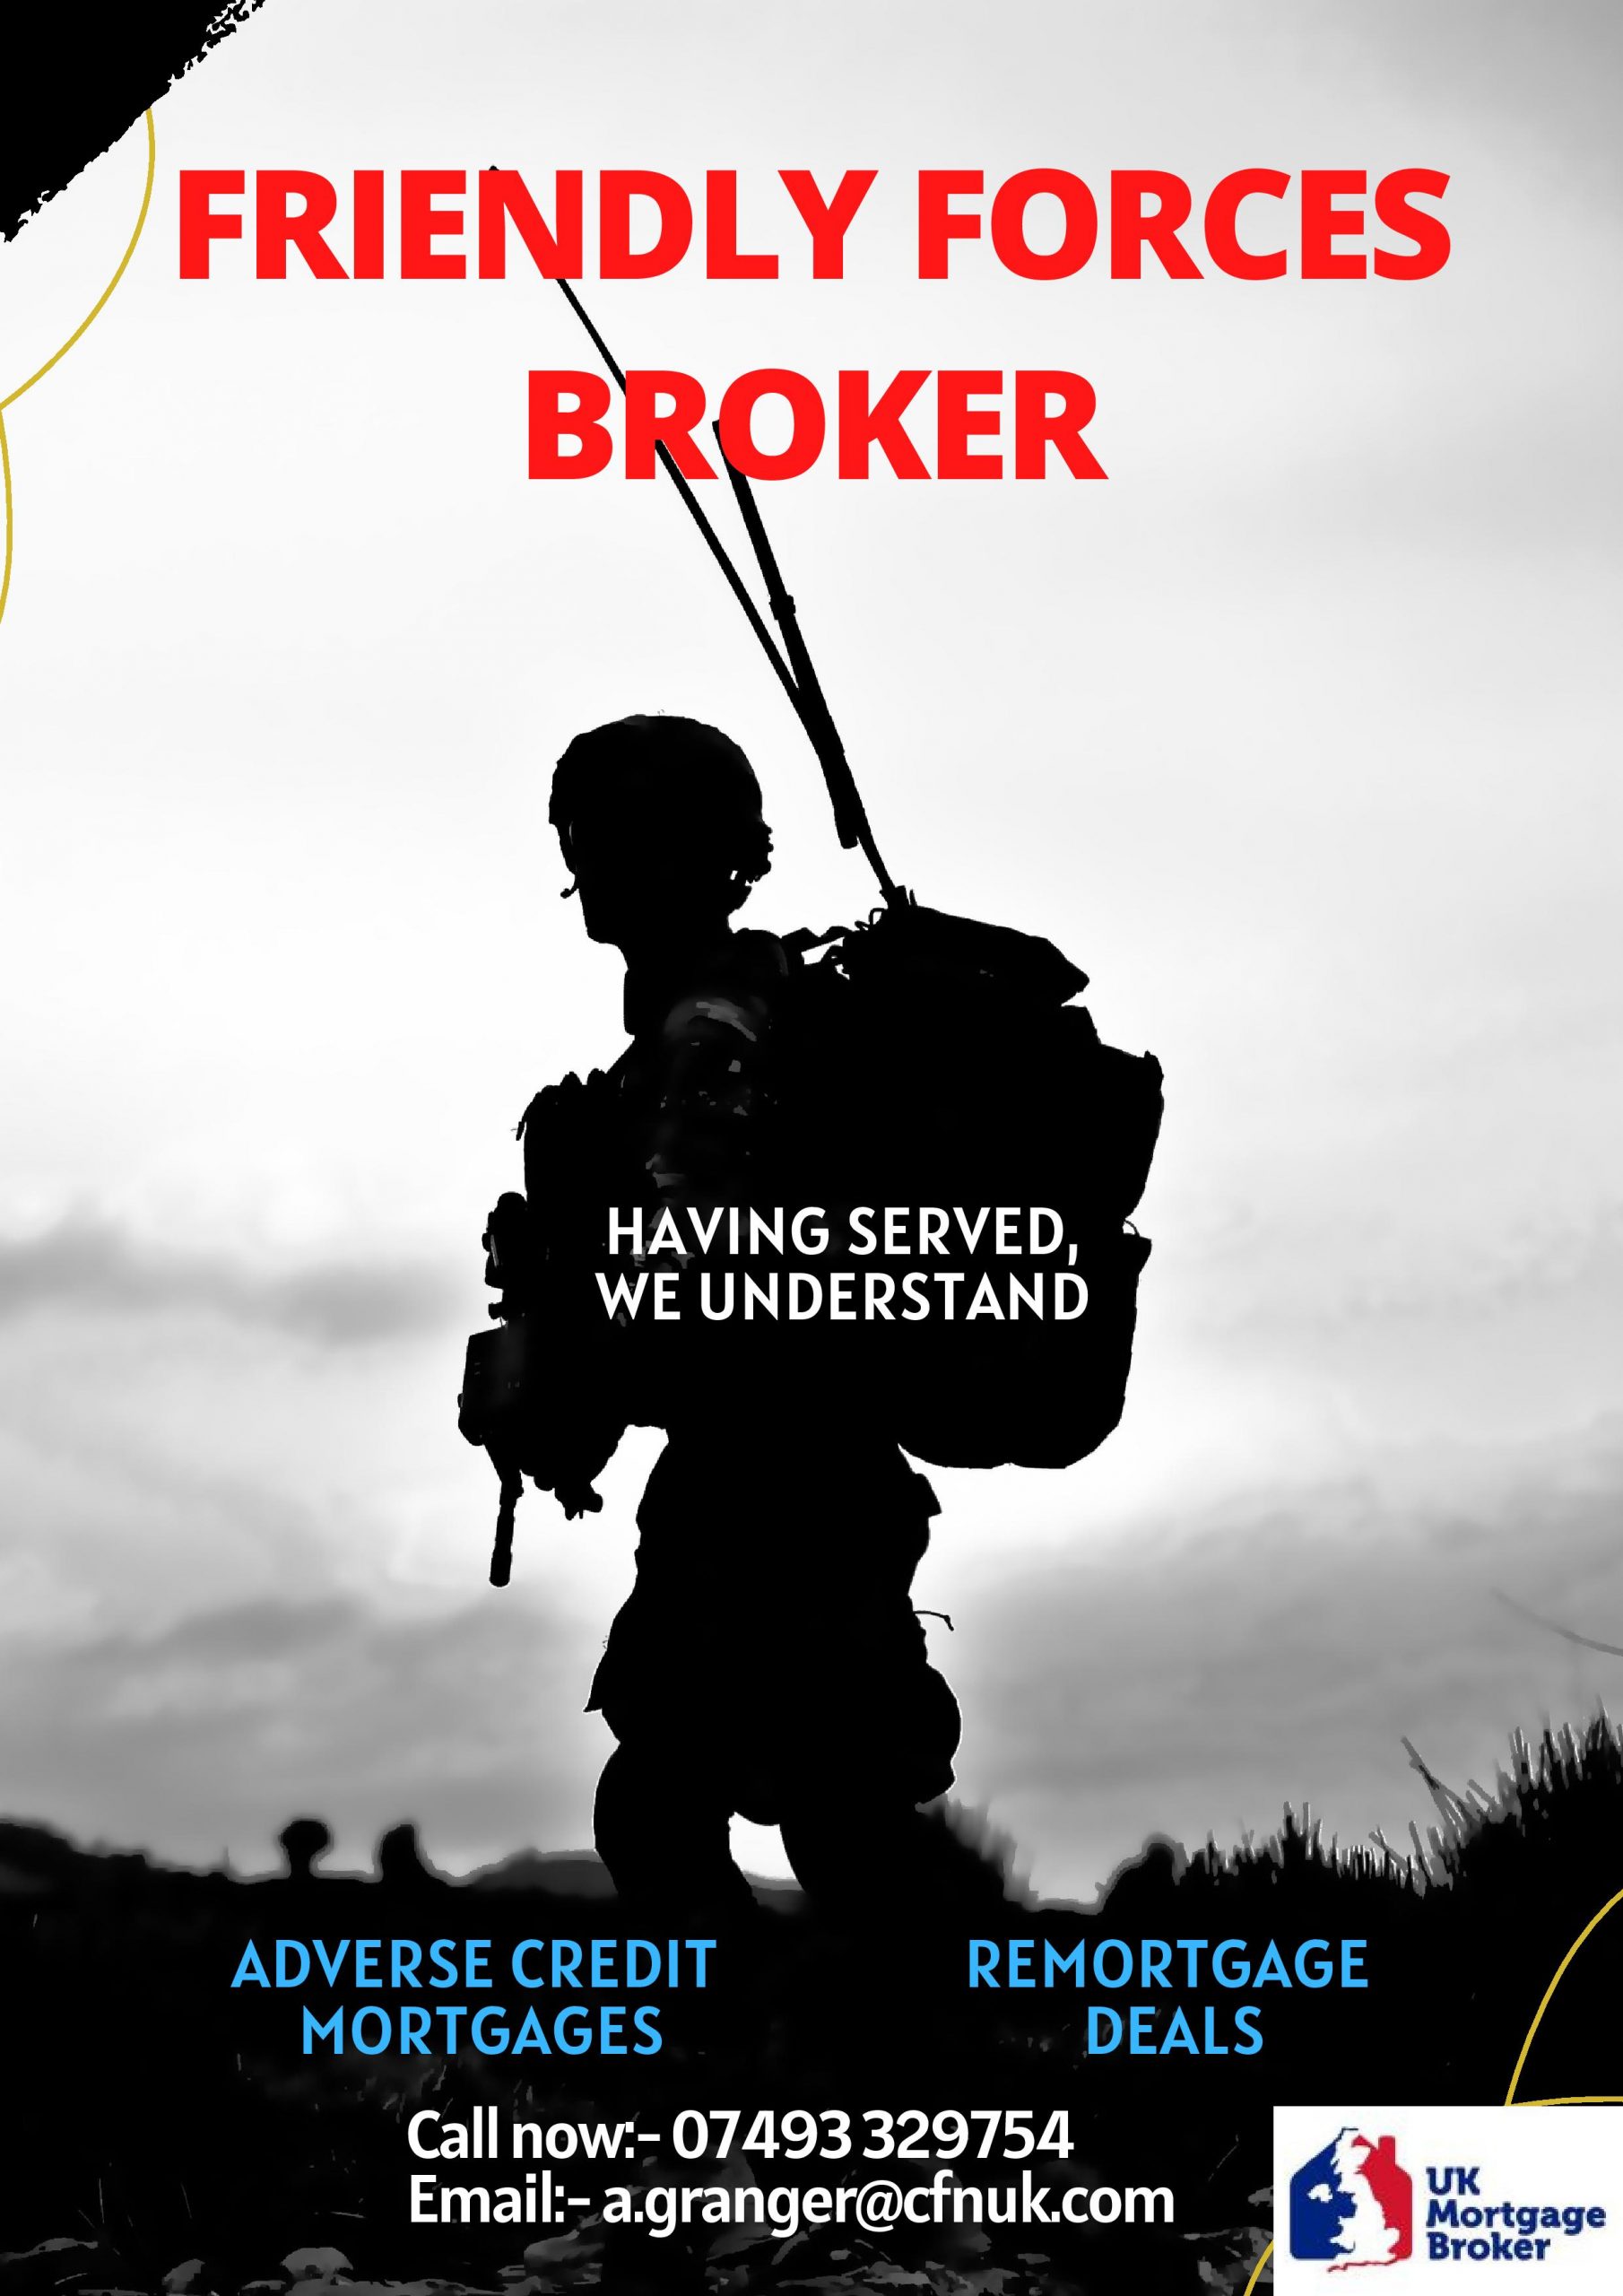 Meet UK Mortgage Broker – Mortgage Services For Those In The UK Armed Forces